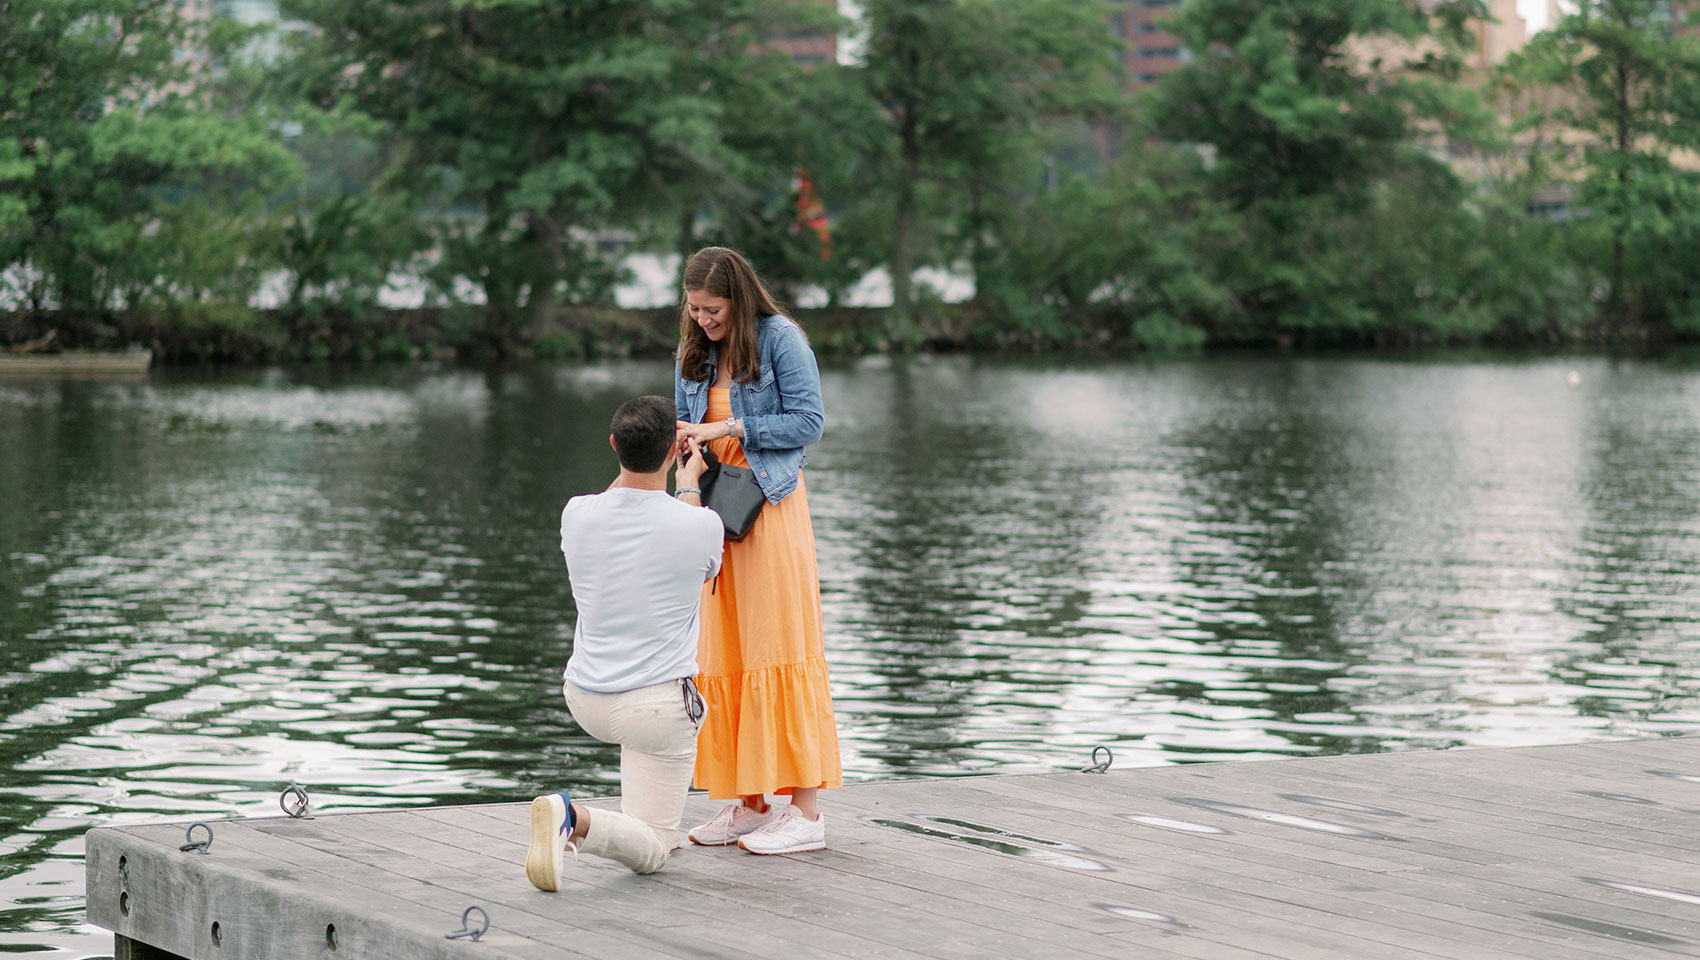 a person kneeling on a dock proposing to another person